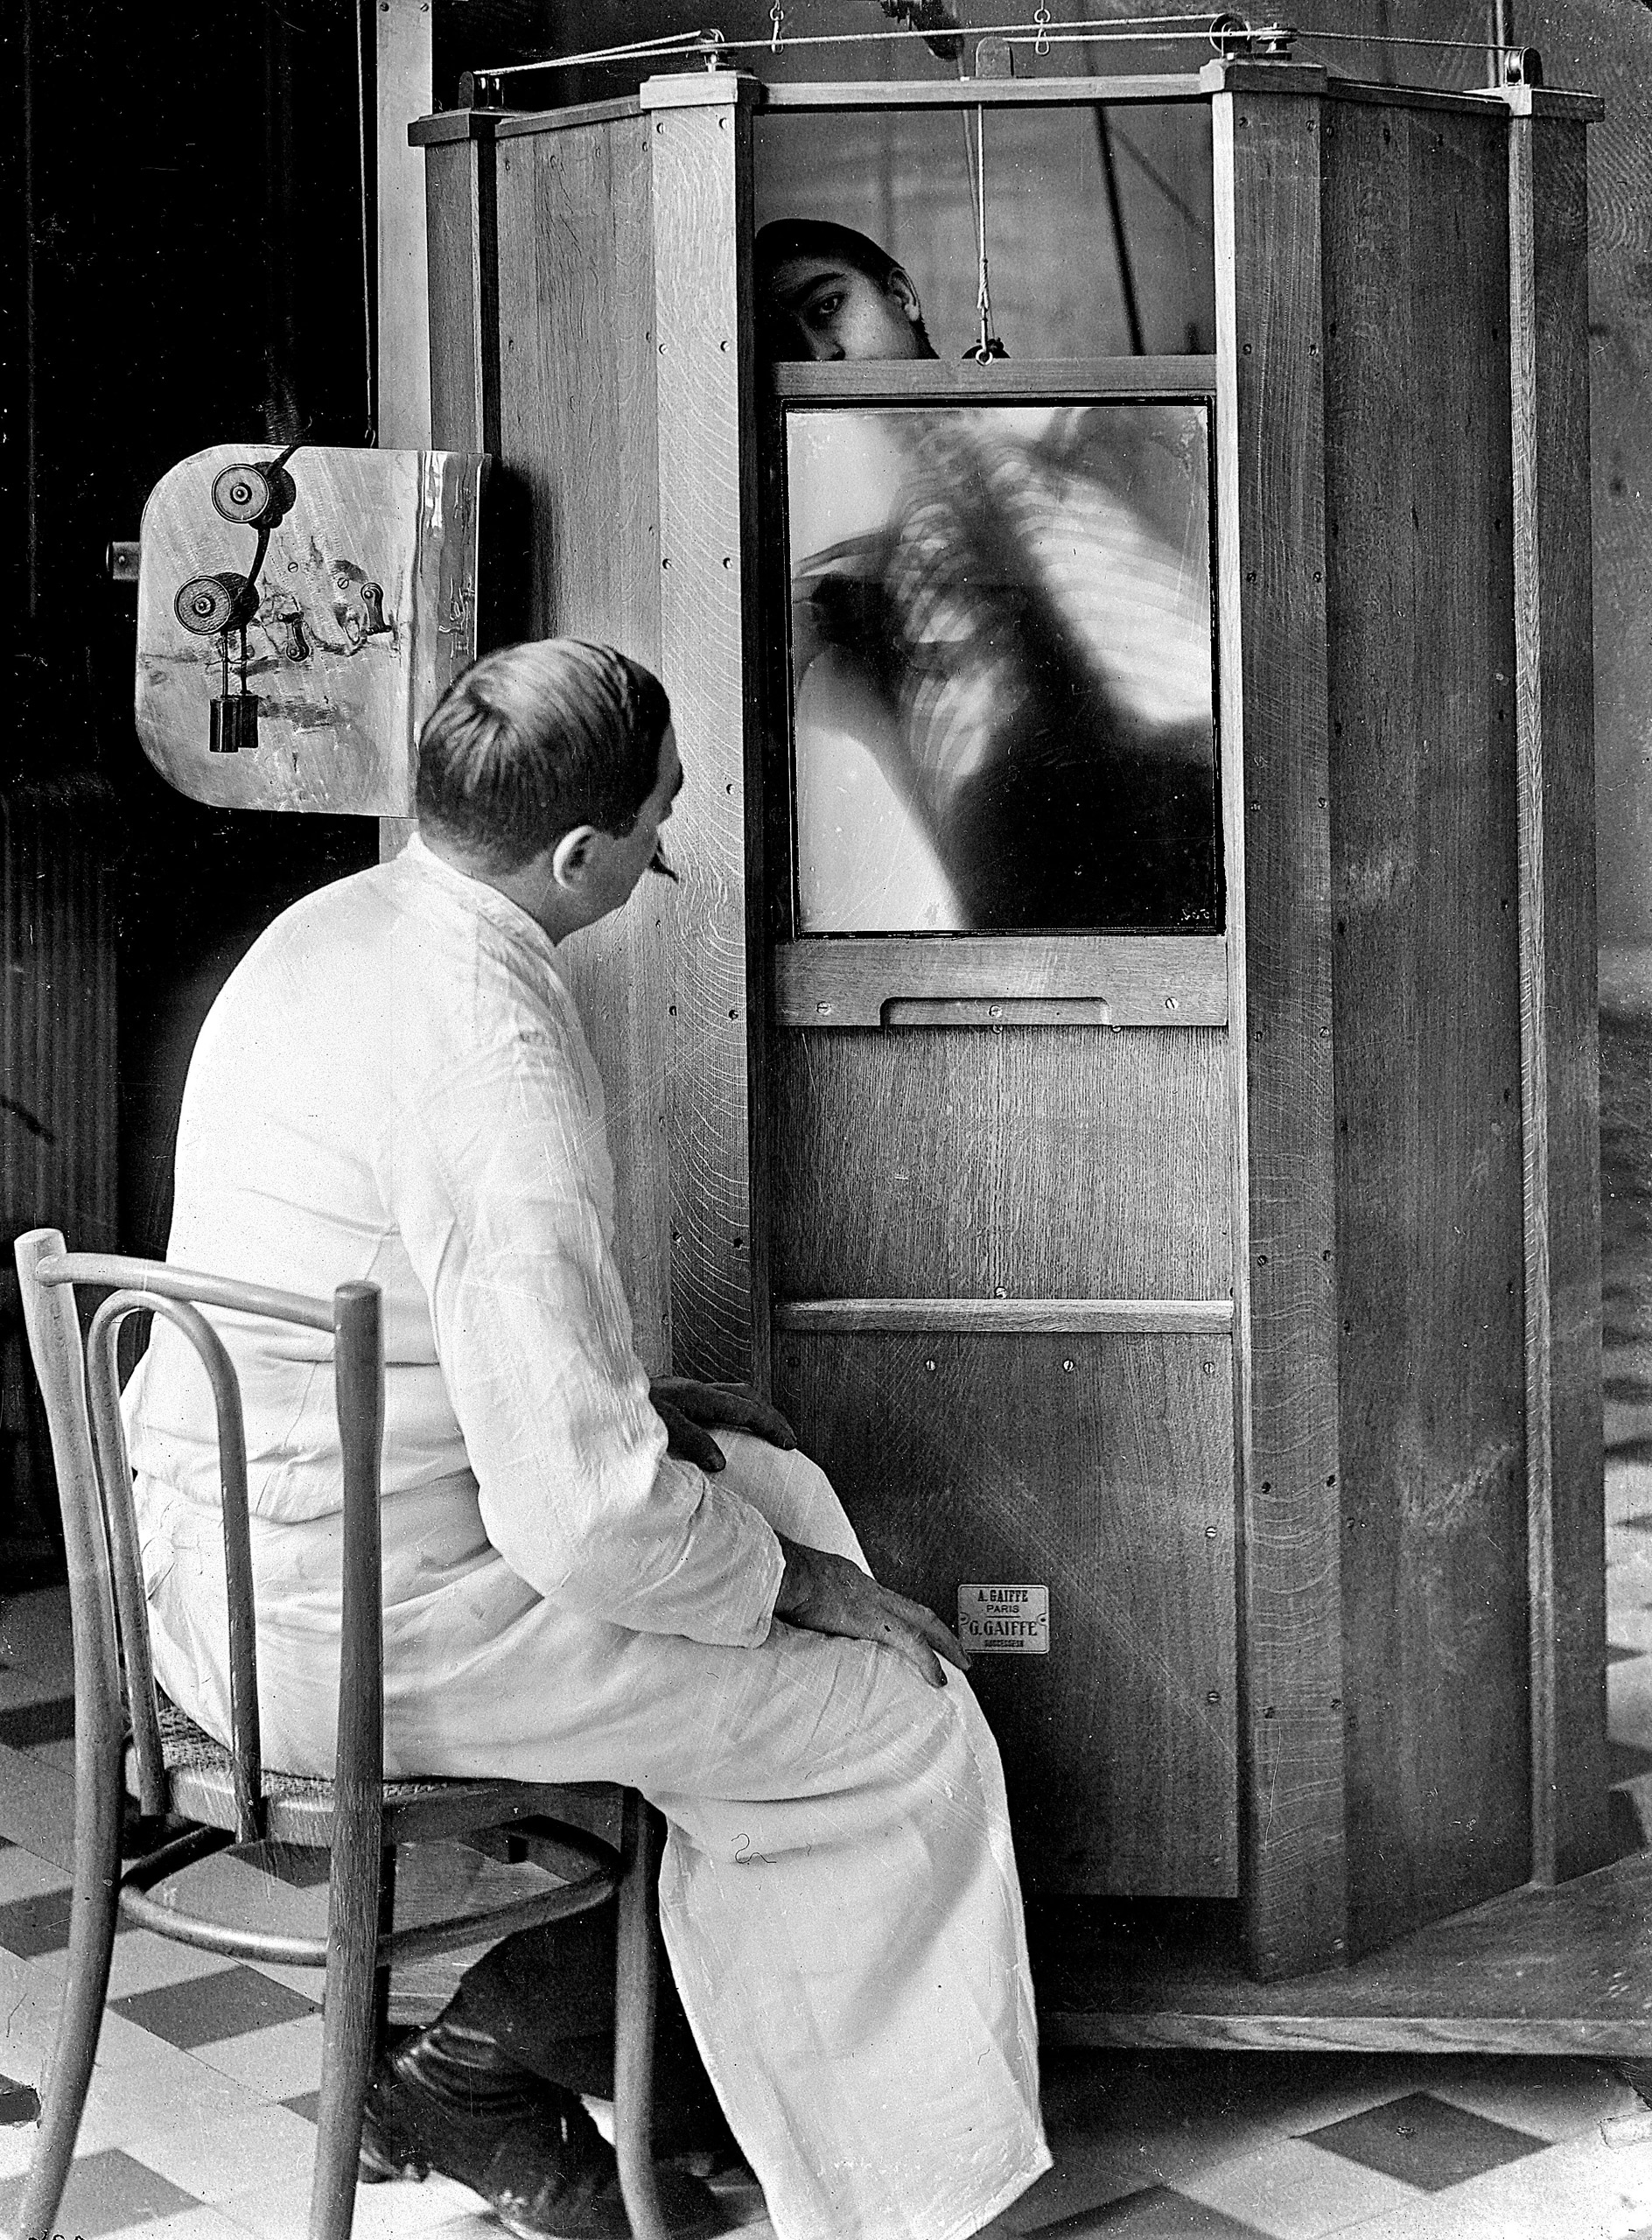 A chest X-ray in progress at Professor Menard's radiology department at the Cochin hospital, Paris, 1914.